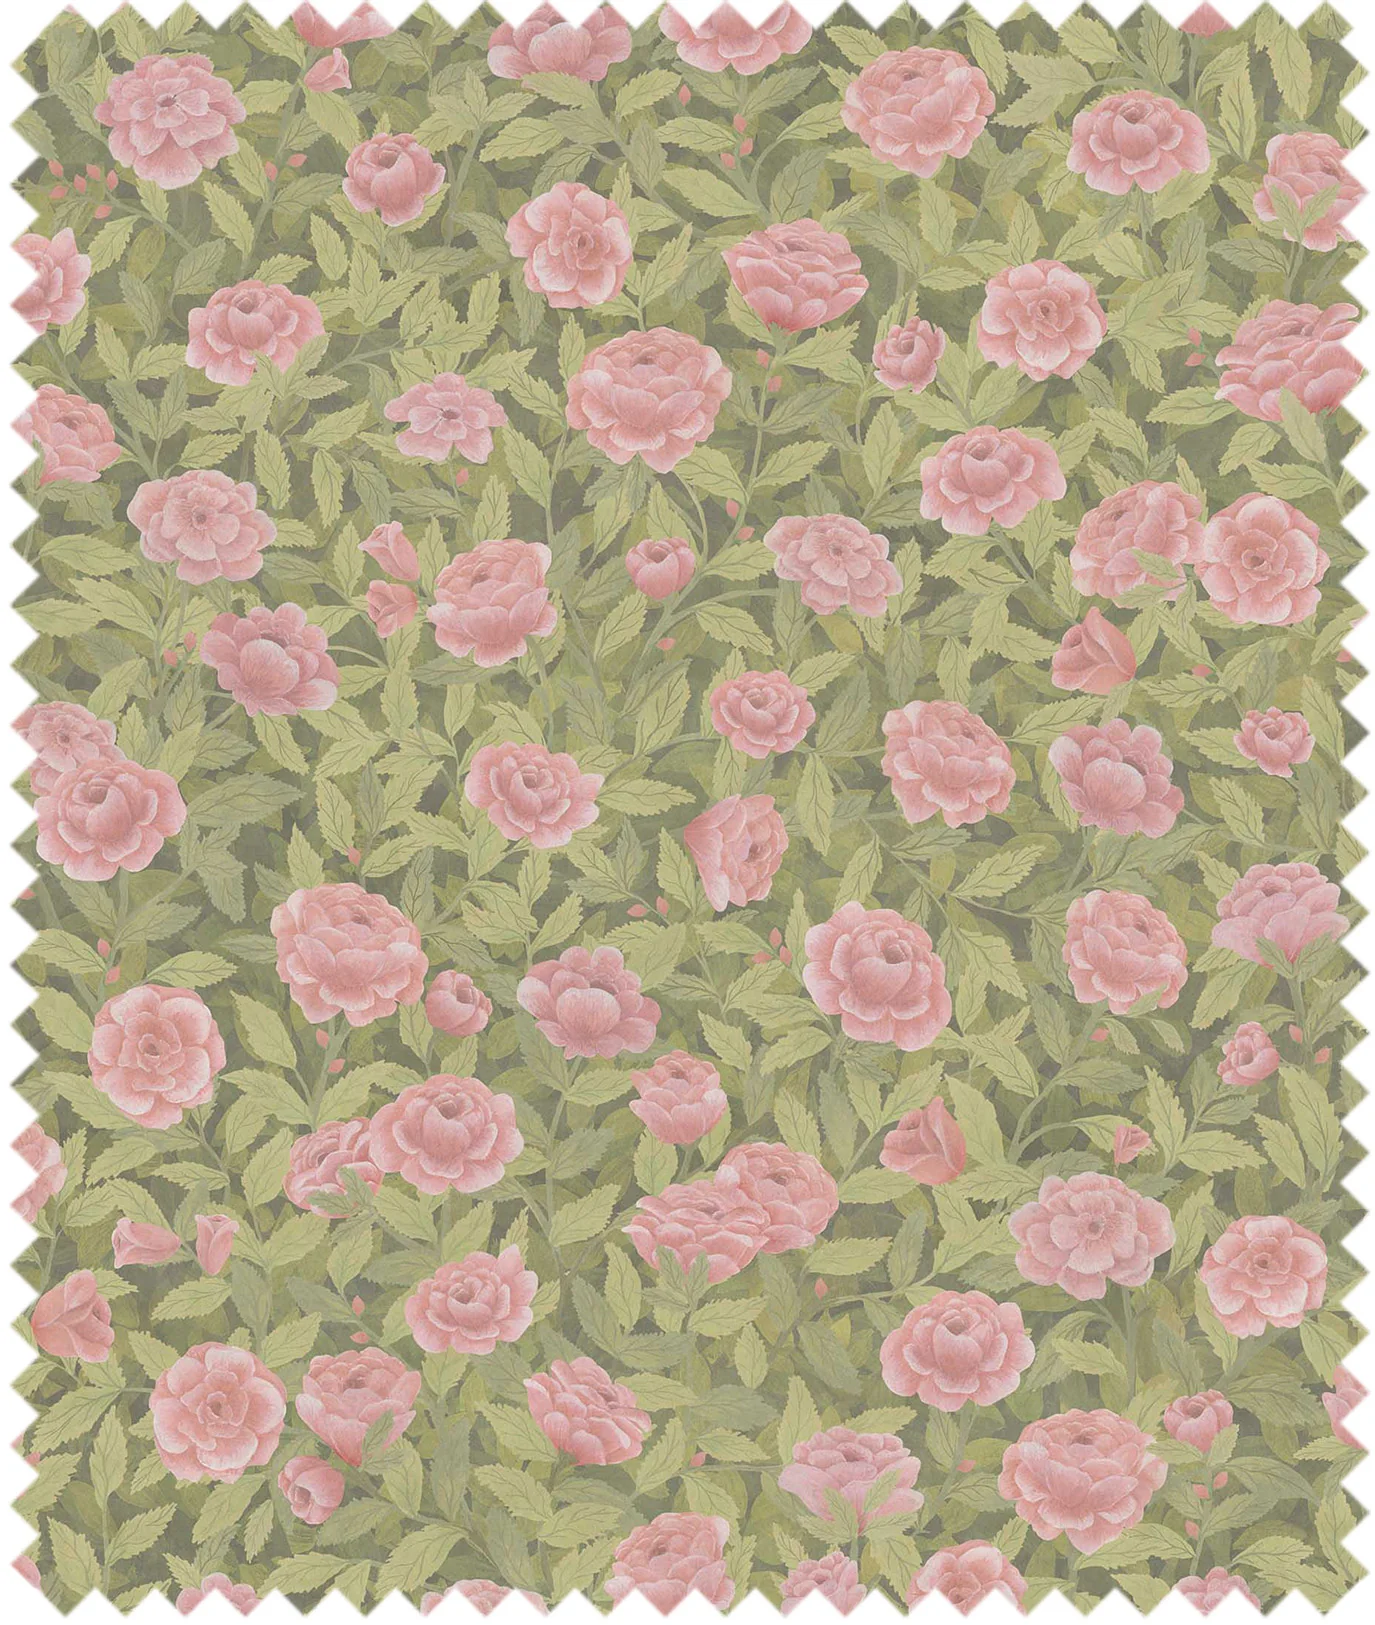 Cole & Son The Gardens Fabric Idyll Roses Linen Union F121/2009